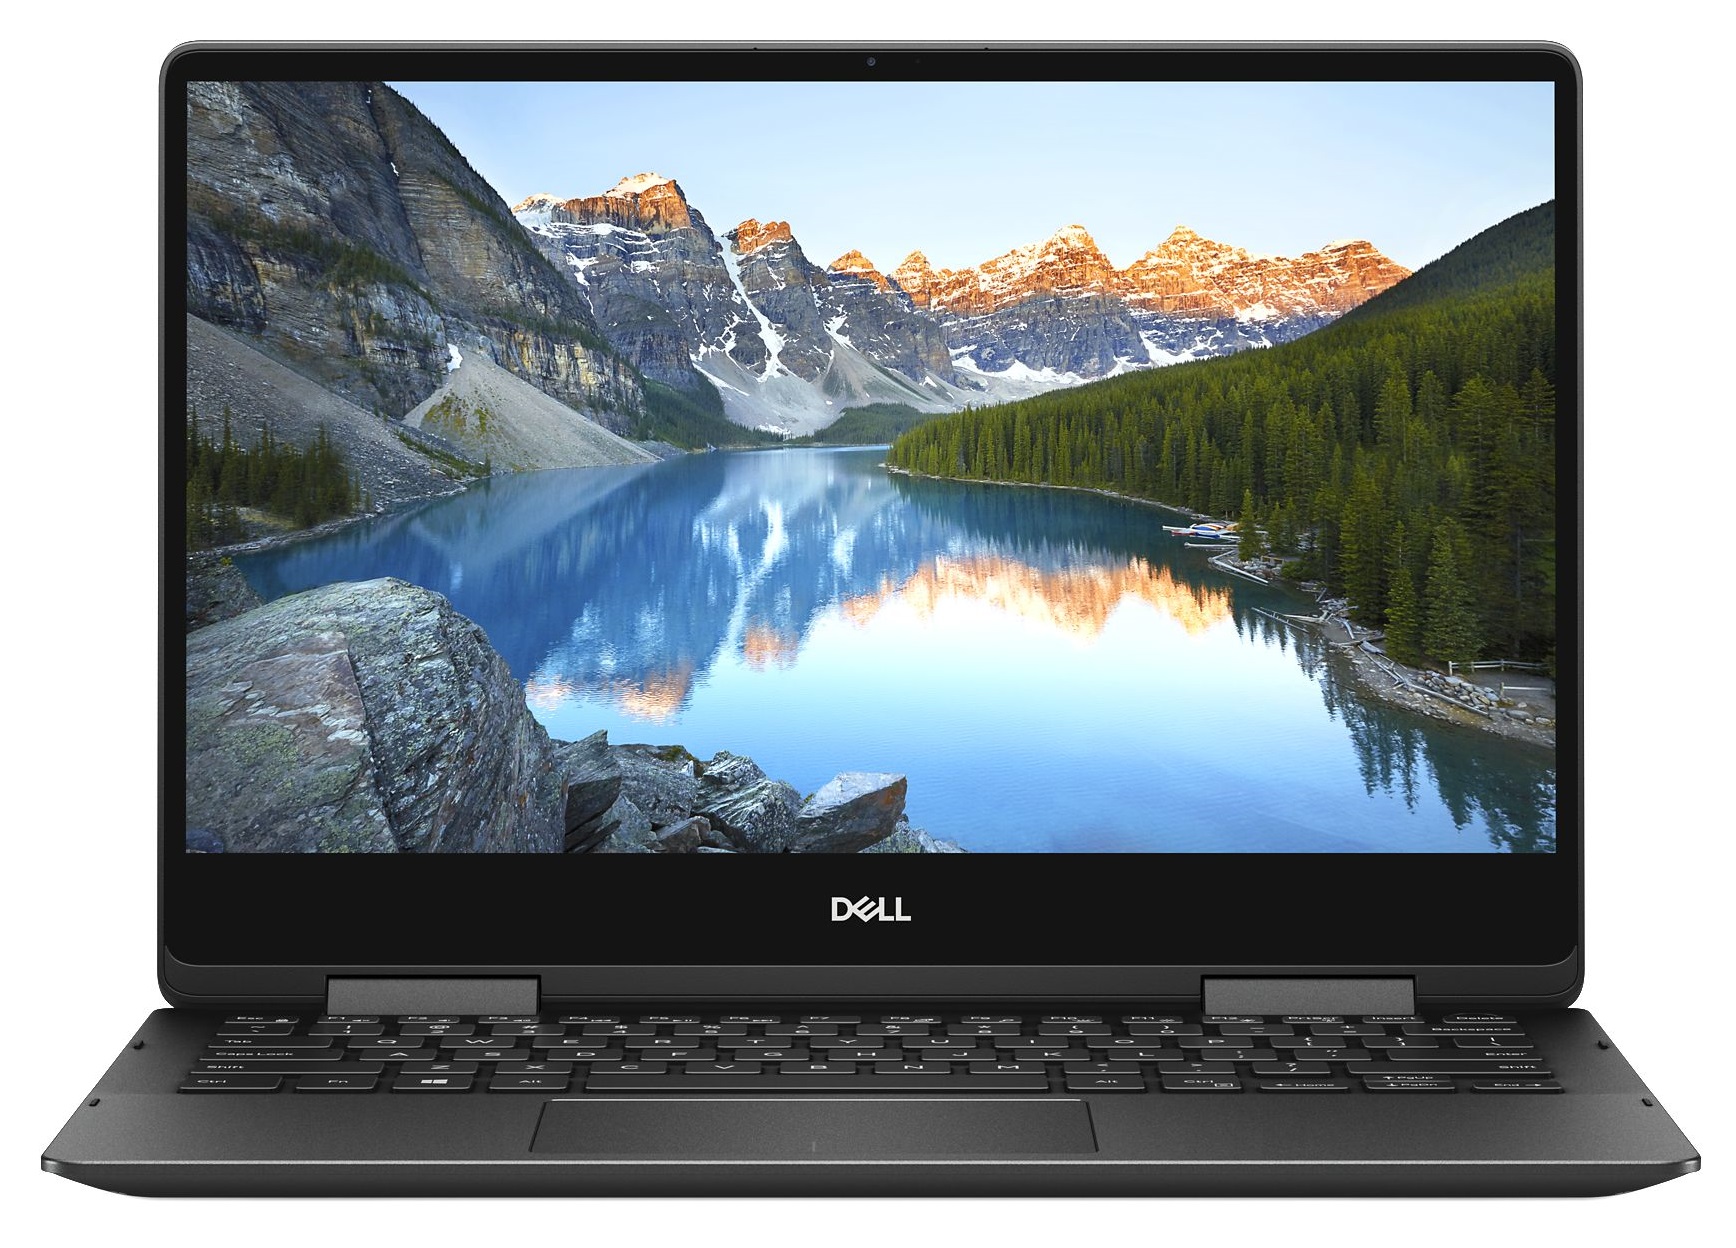 Dell Inspiron 13 7386 2-in-1 - Specs, Tests, and Prices 